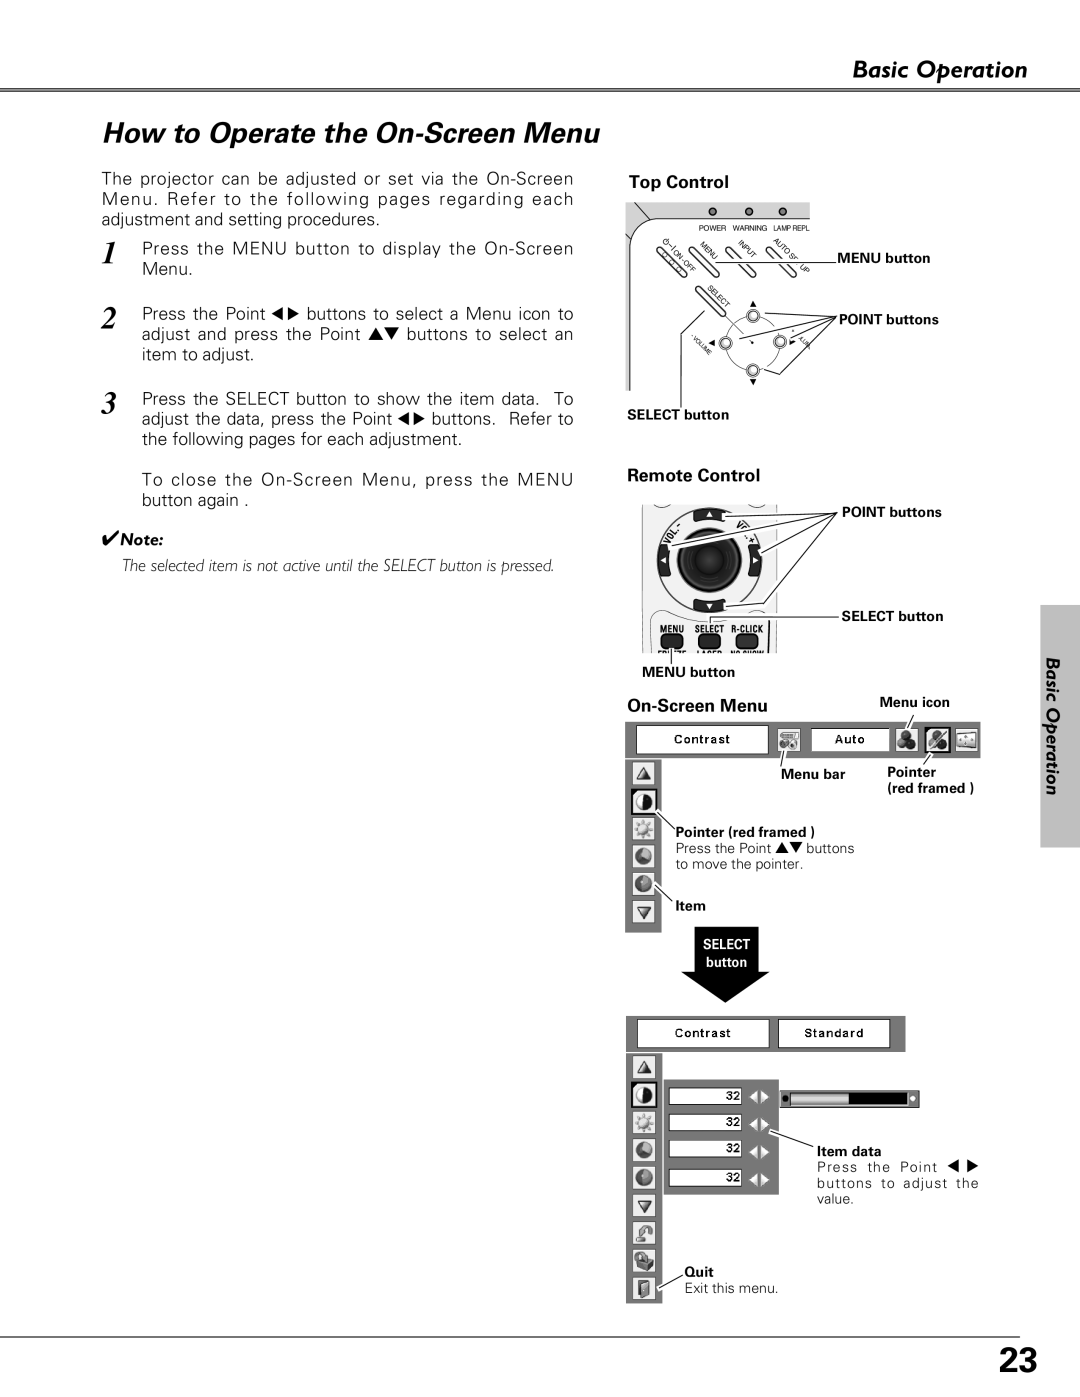 Eiki LC-XB27 owner manual How to Operate the On-Screen Menu, Basic Operation, Top Control, Remote Control 